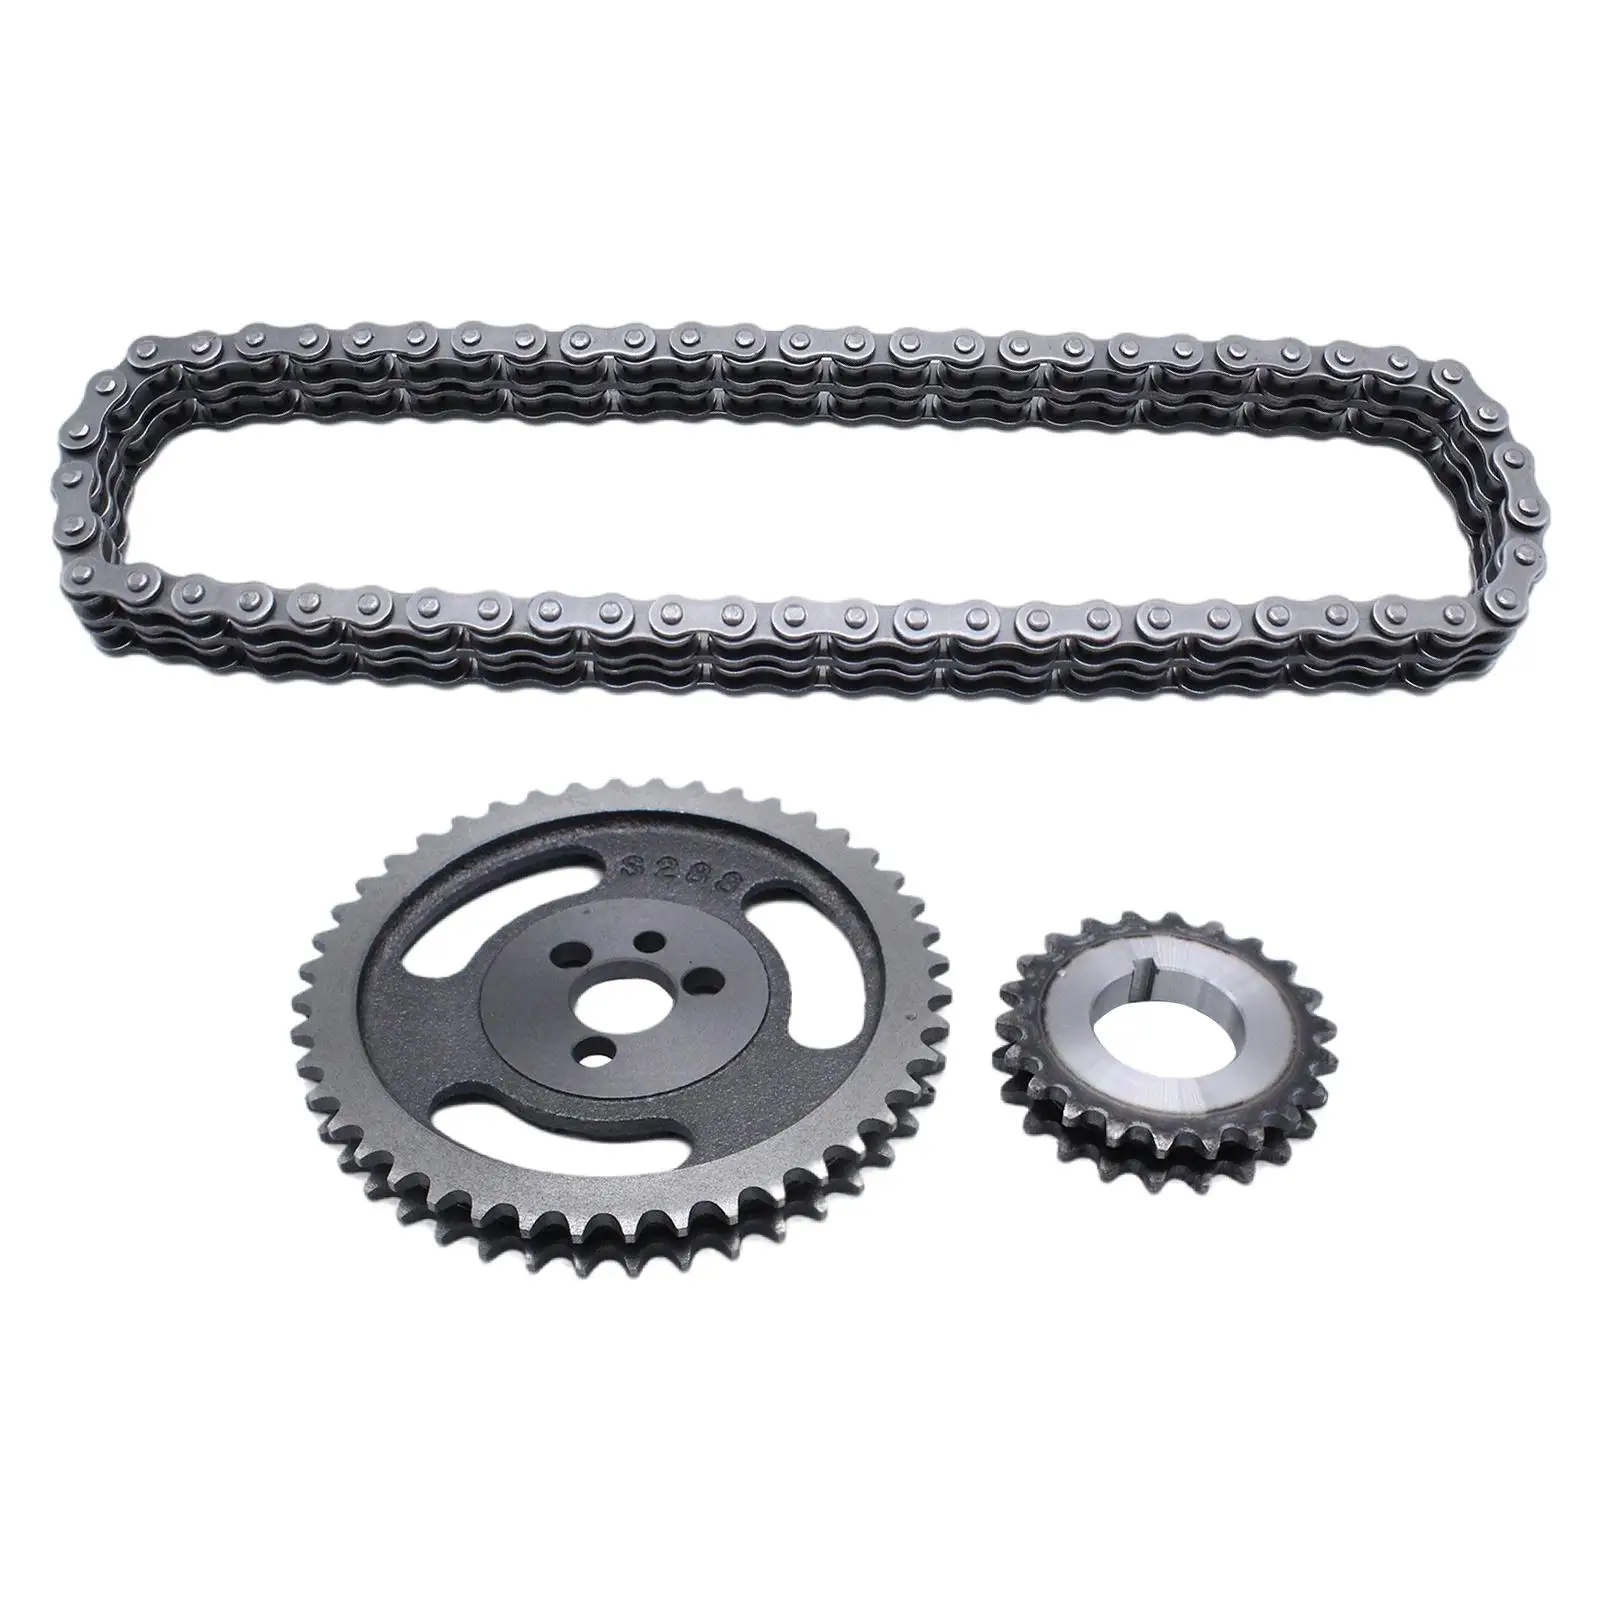 Timing Chain and Gear Set TS163 3-163S Side Engine for  Sbc 5.7 350 383 305